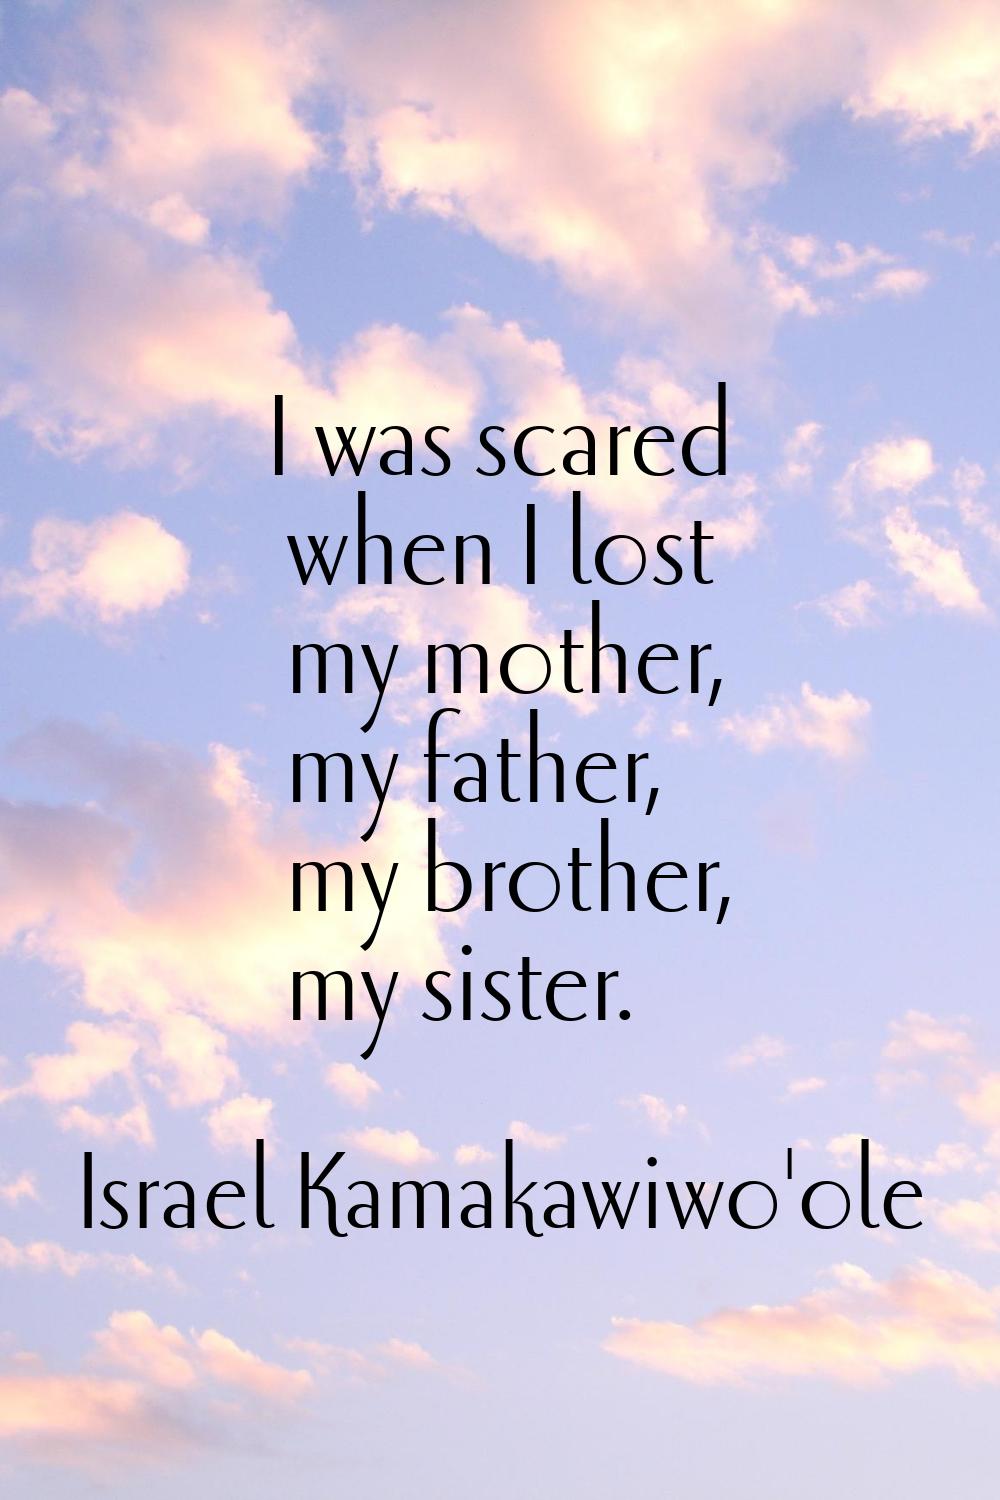 I was scared when I lost my mother, my father, my brother, my sister.